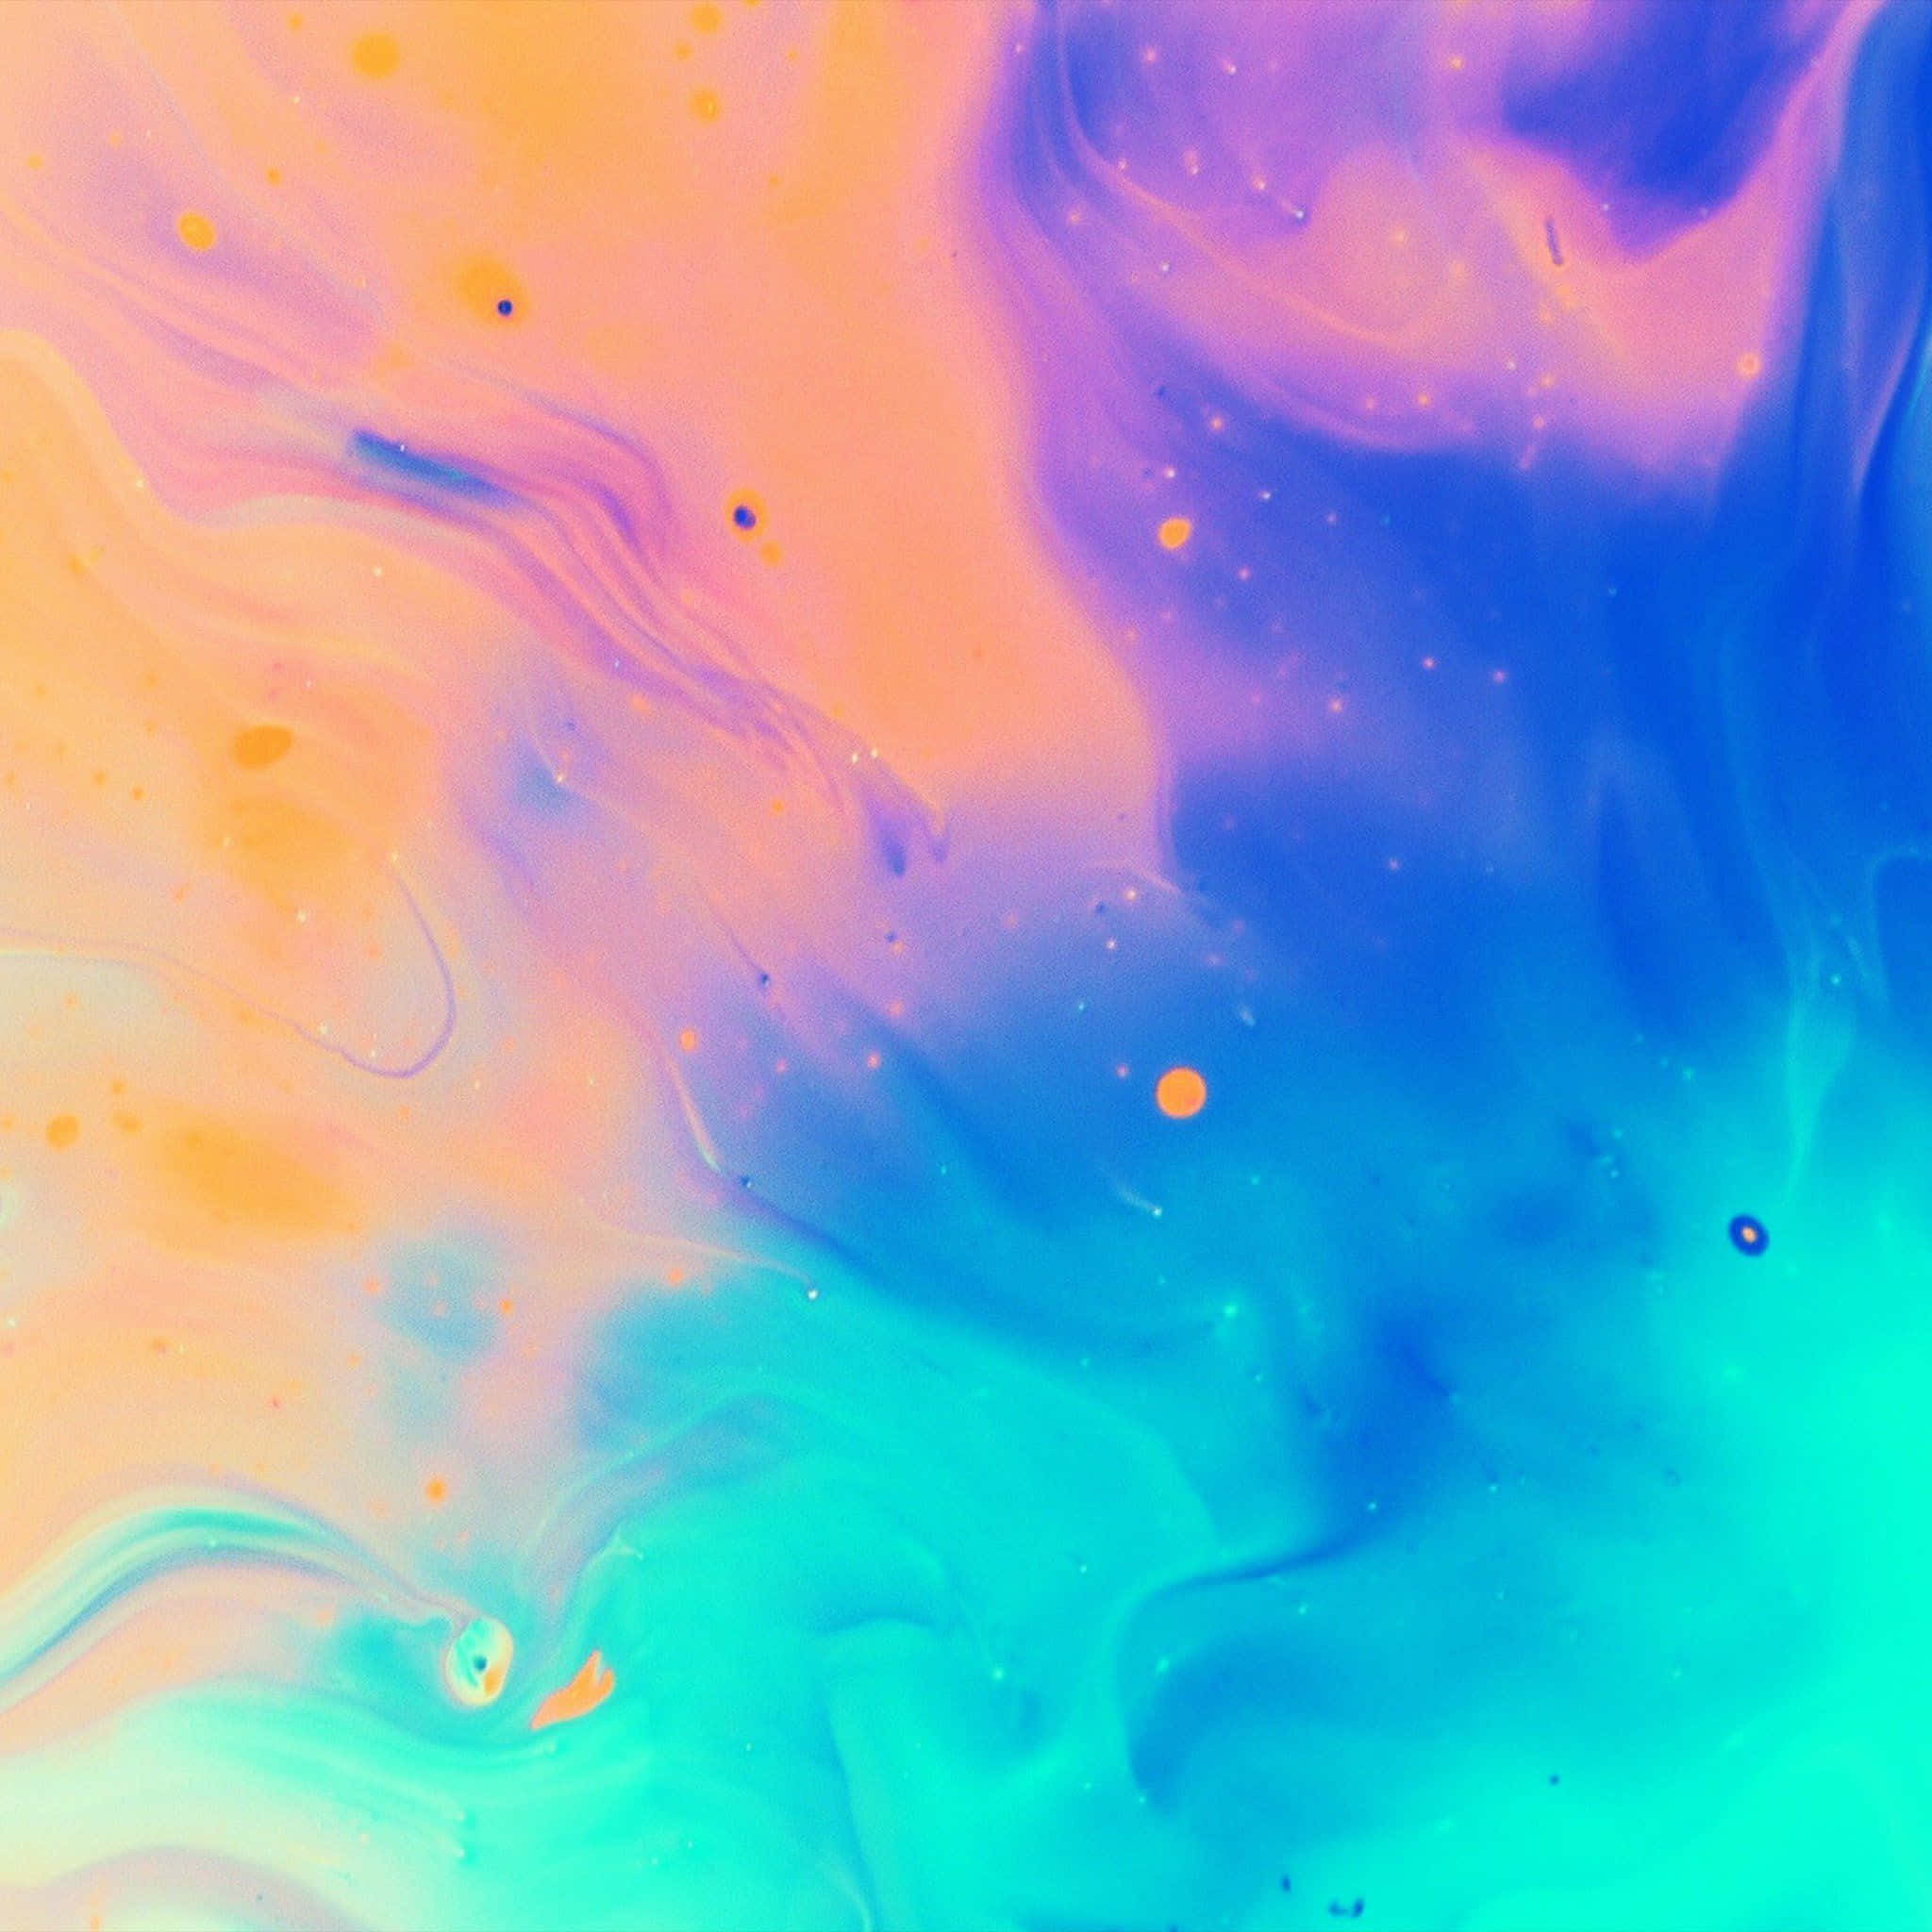 A Colorful Abstract Painting With A Blue, Orange And Yellow Background